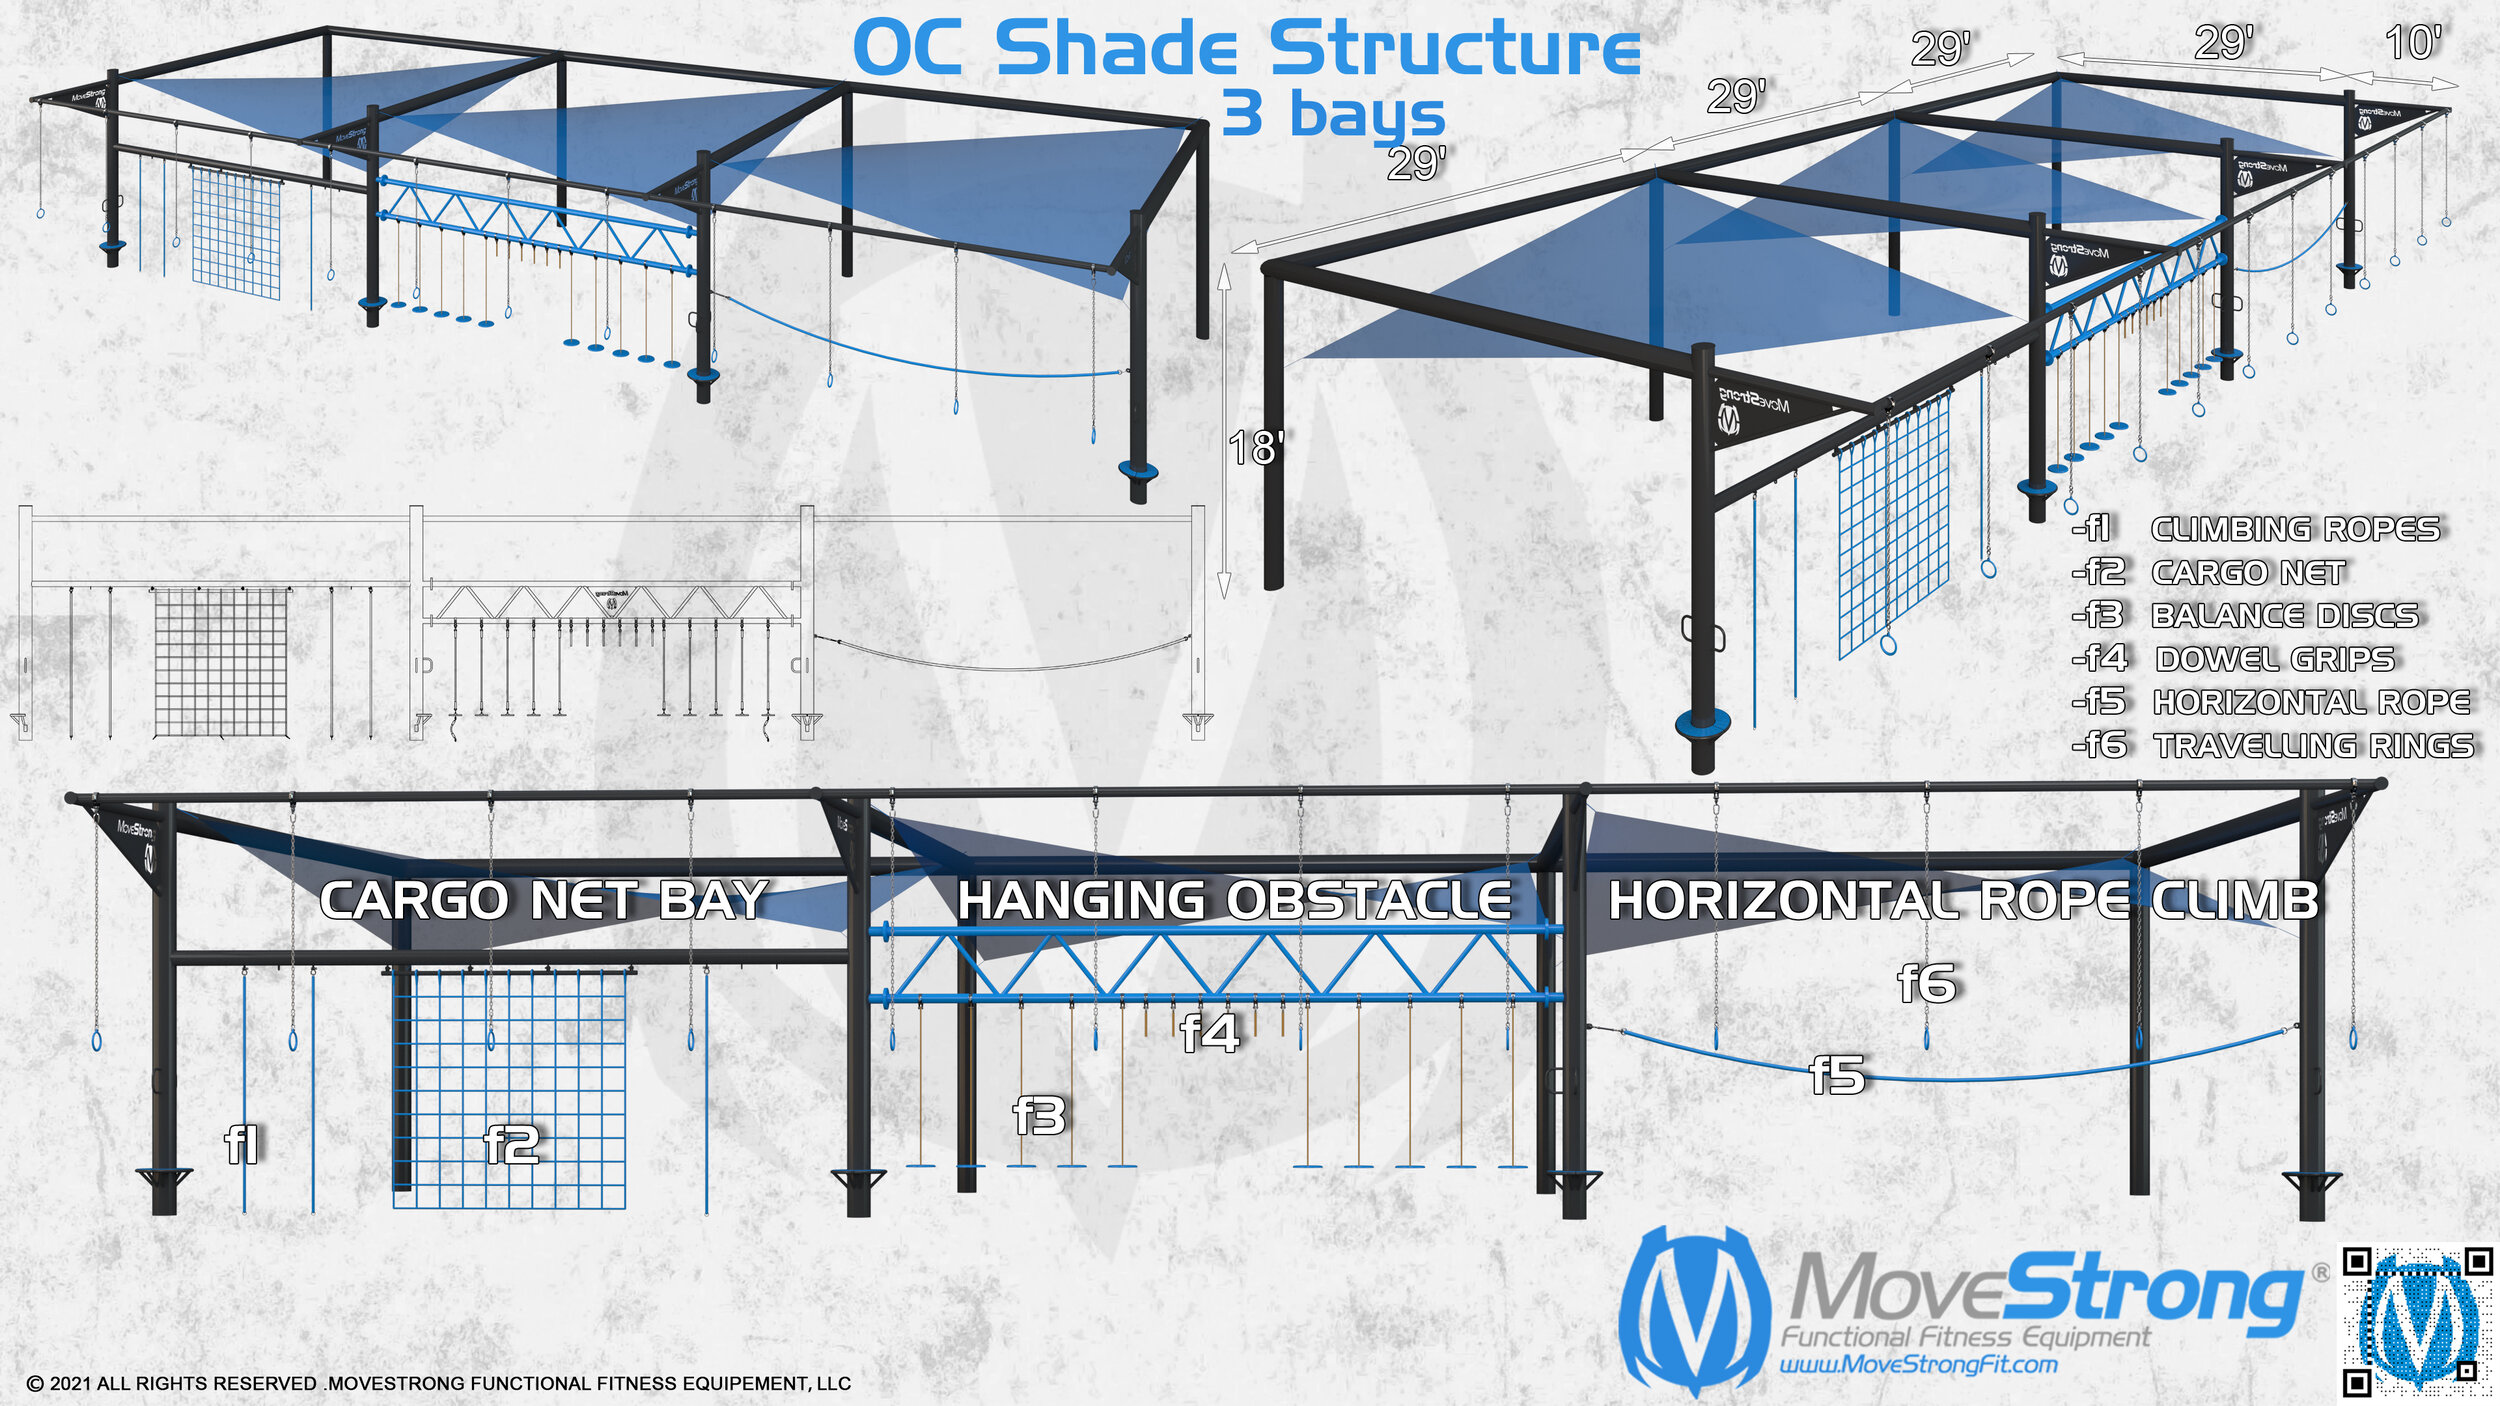 MoveStrong 3-Bay Training Shade Structure